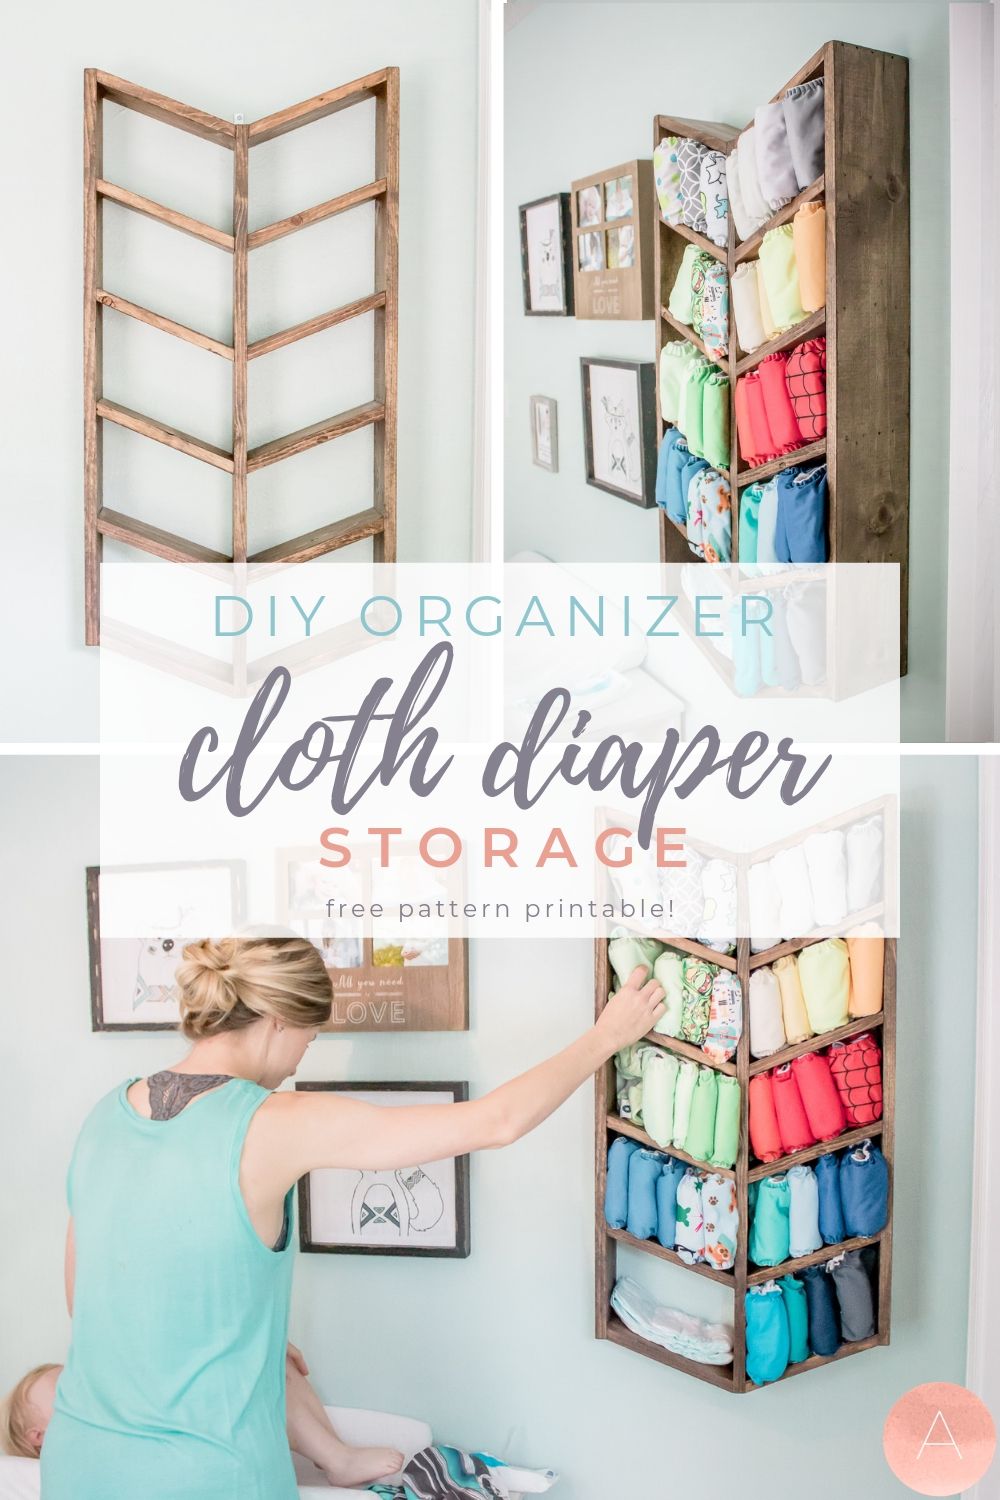 Do you need a storage idea for your little one’s cloth diapers? Don’t hide those cute designs away - display them in this super trendy hanging cloth diaper DIY organizer! Hang it on the wall, then use it as a multi-purpose shelf once your little one is potty trained. Learn how to make it yourself - just click for the free pattern! #clothdiapers #babynursery #nurserydesign #homestorage #organized #diykids